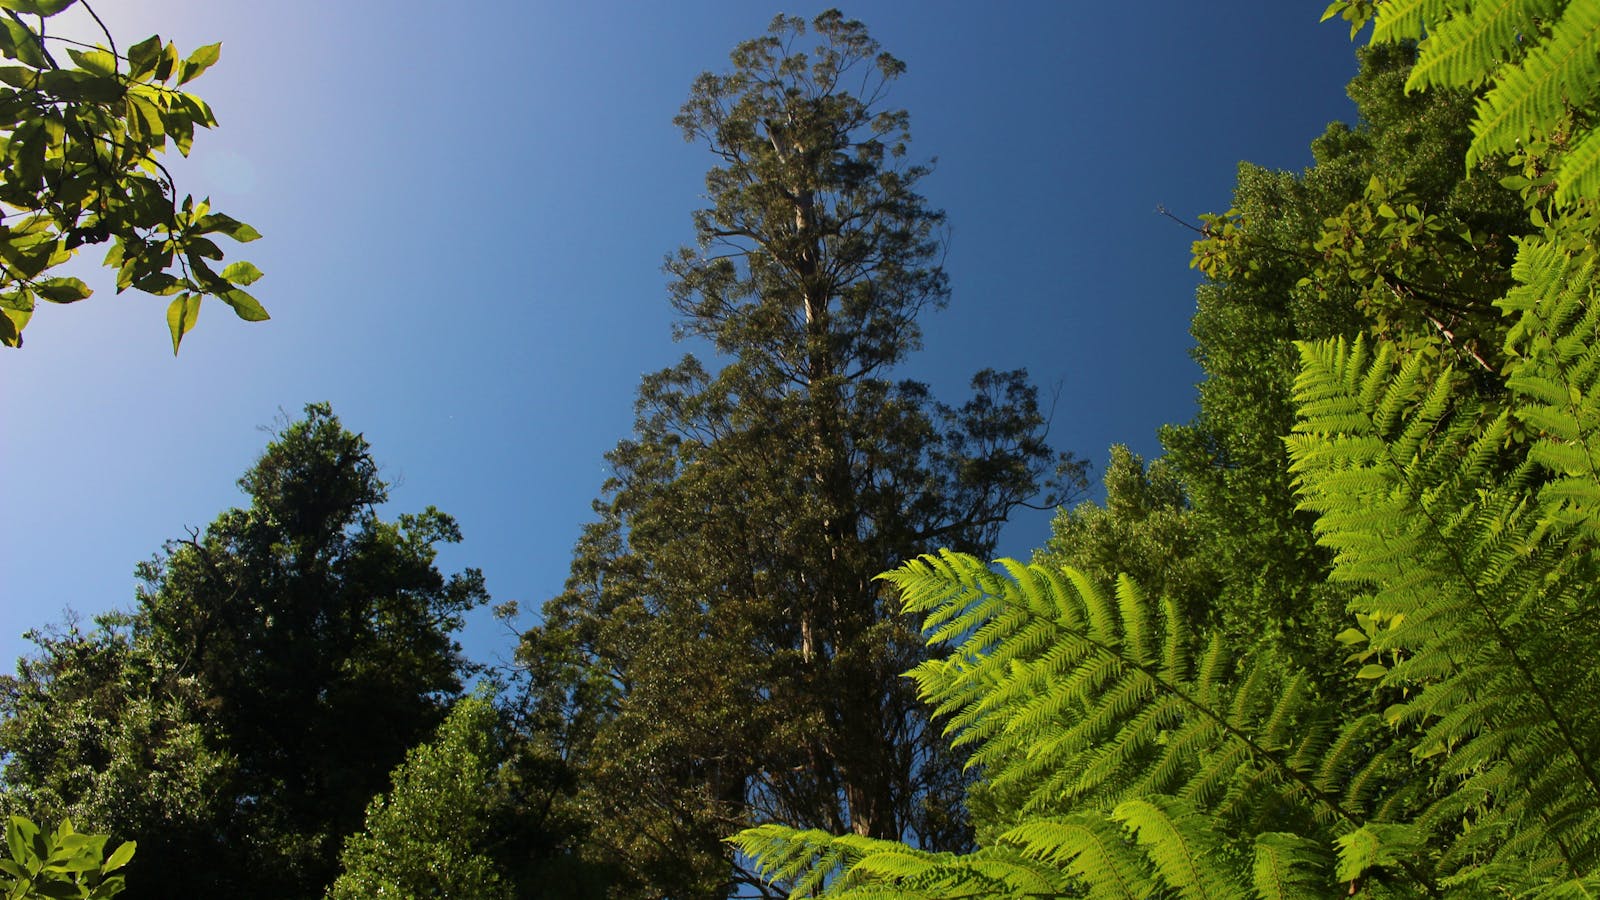 The top of the world's tallest flowering towers above in a bright blue sky